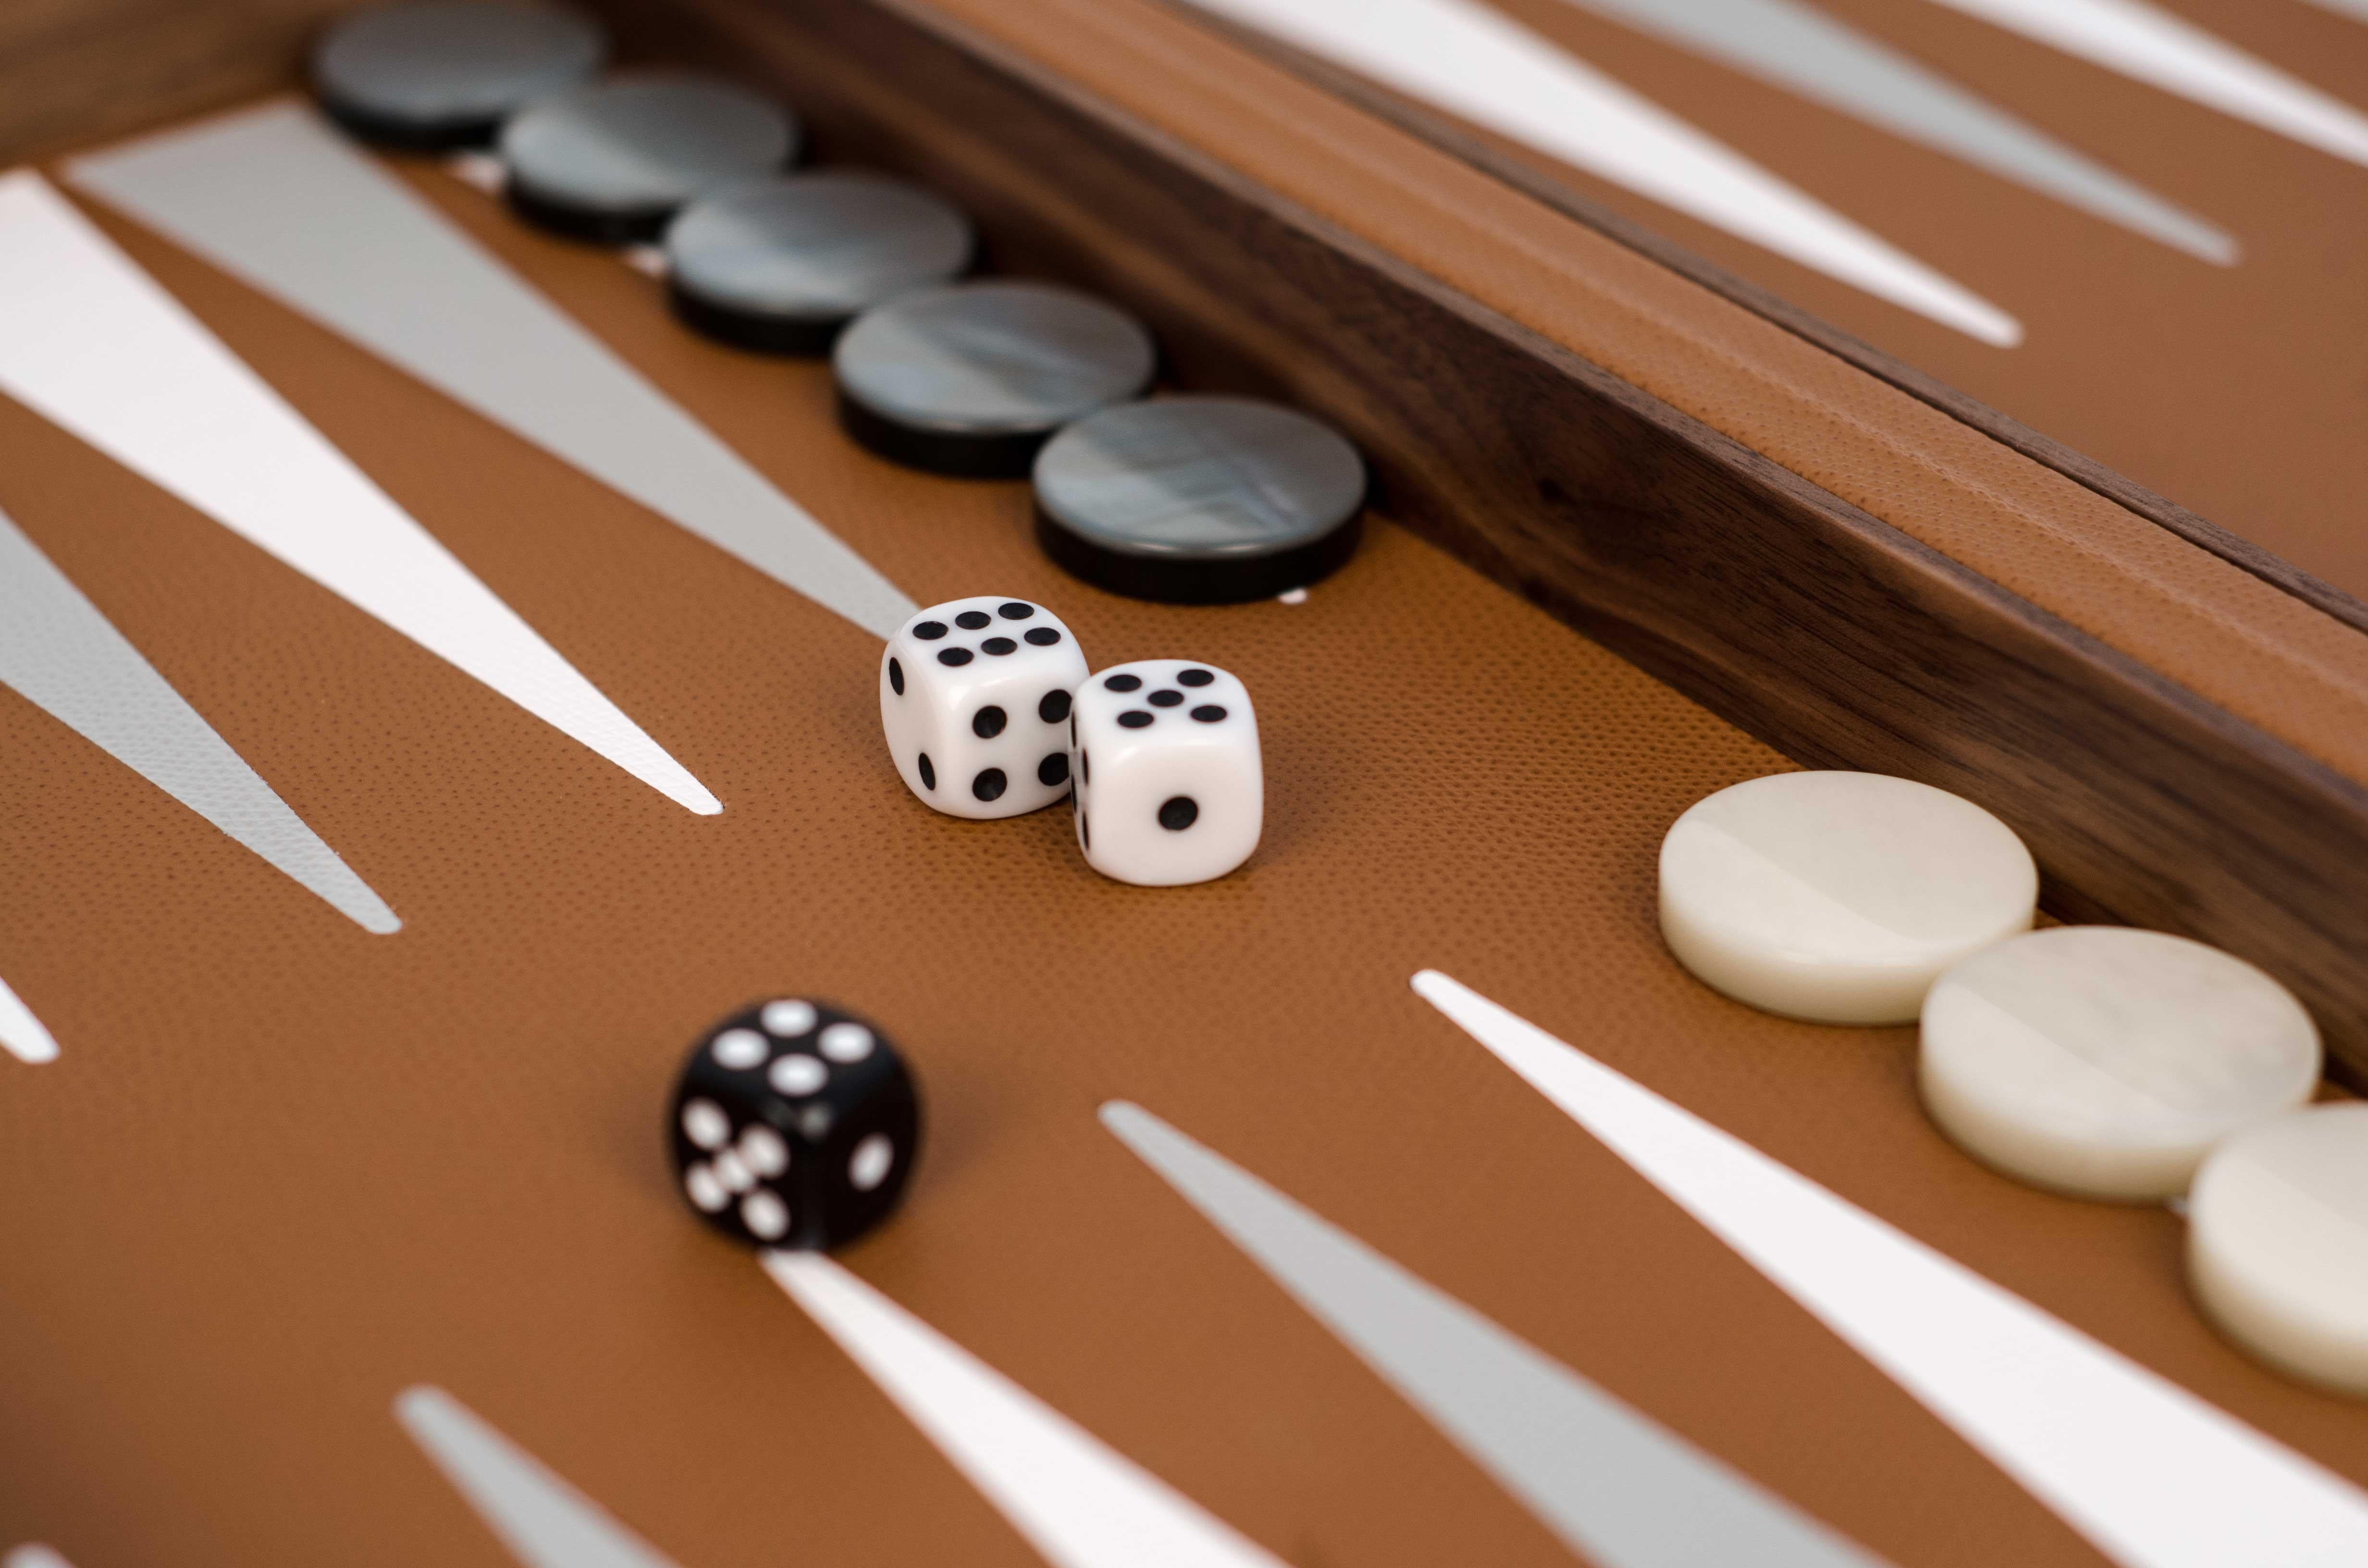 Our backgammon set, a must of board games.

Expertly crafted with canaletto walnut wood and dressed on the outside with a textured calfskin leather covering, its interior delivers a colourful twist into a cream background. We can't get enough of